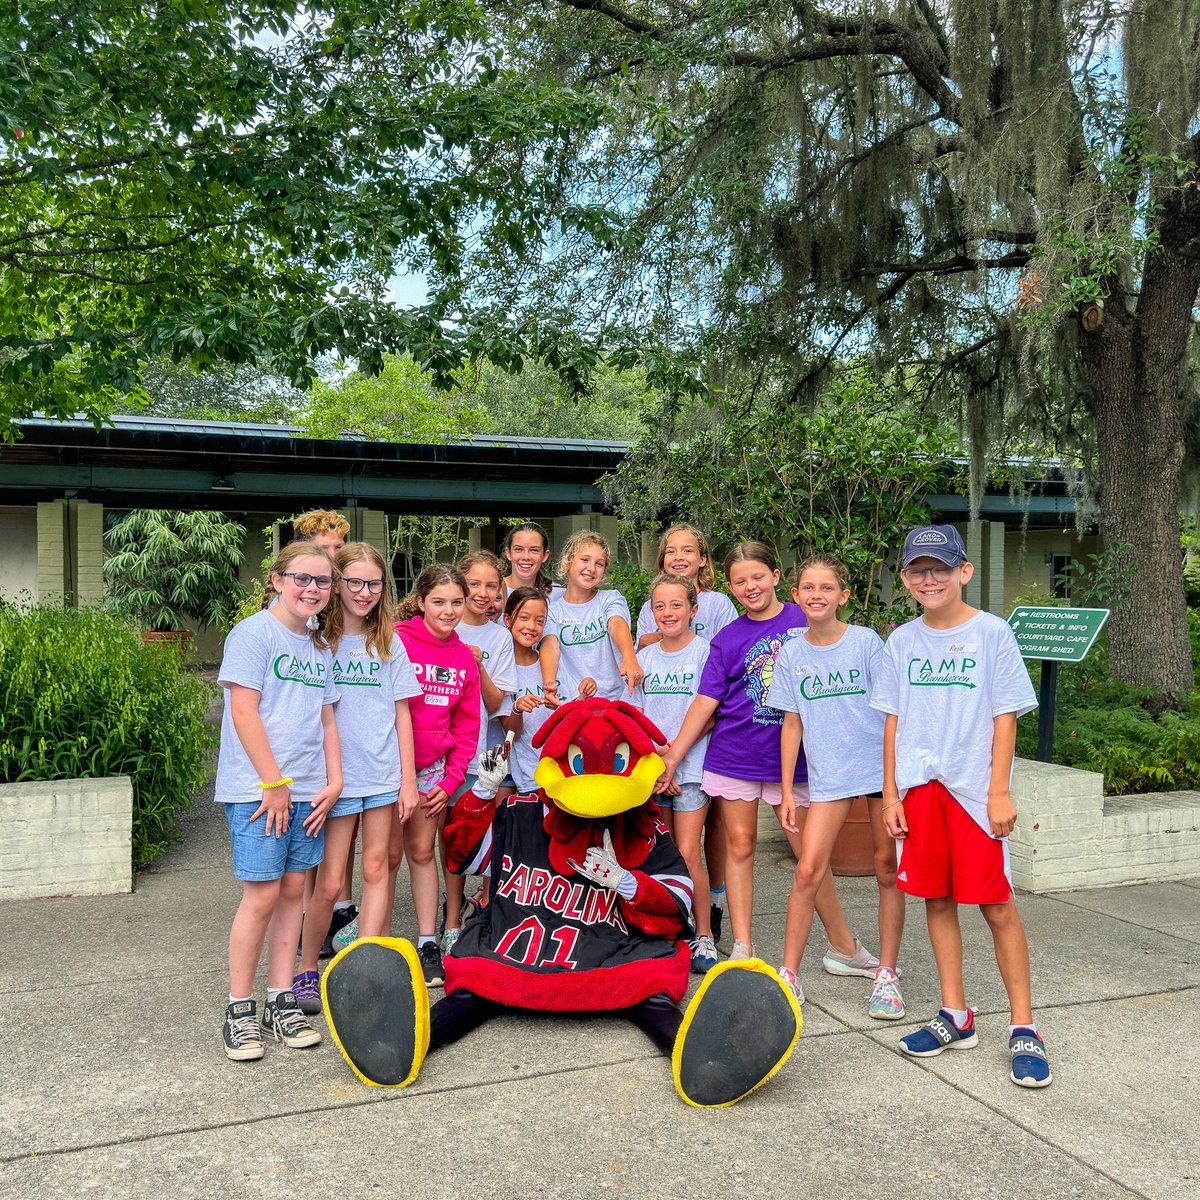 Camp Brookgreen got a visit from a true legend! We welcomed Cocky, the extraordinary University of South Carolina mascot, into #BrookgreenGardens this week! Thanks for stopping by, @Cocky2001! #EverchangingSimplyAmazing @GamecocksOnline